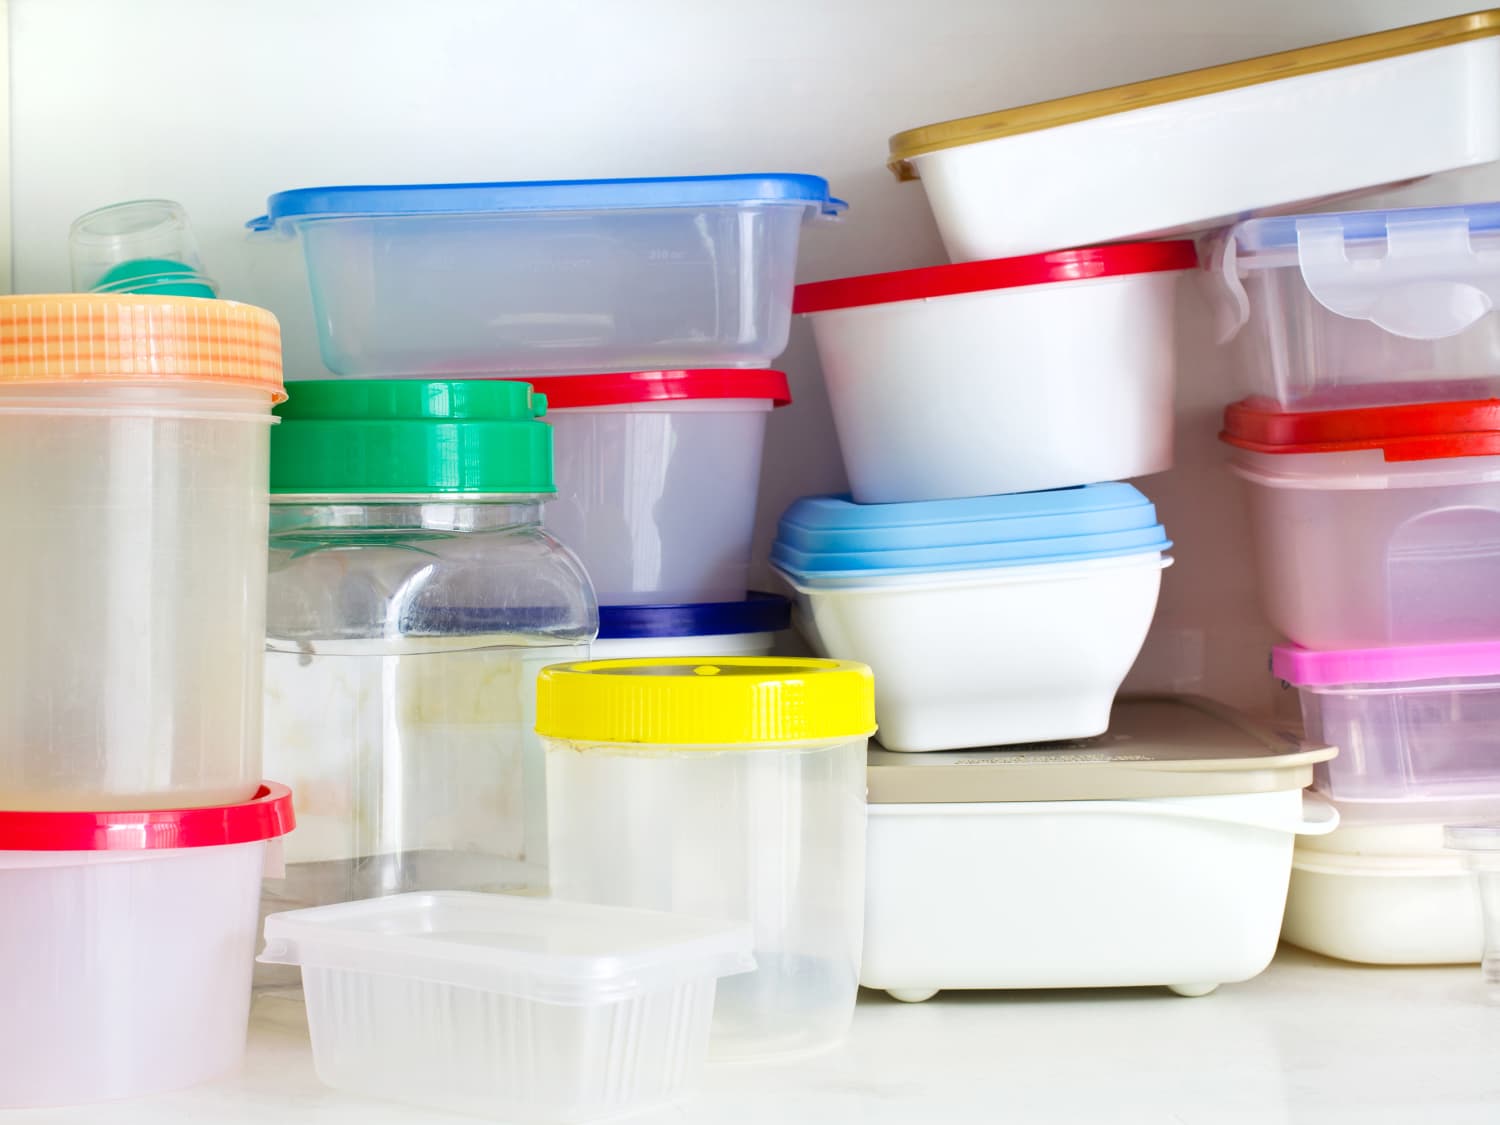 https://cdn.apartmenttherapy.info/image/upload/f_jpg,q_auto:eco,c_fill,g_auto,w_1500,ar_4:3/at%2Forganize-clean%2Ffood-storage-containers-pile-tupperware